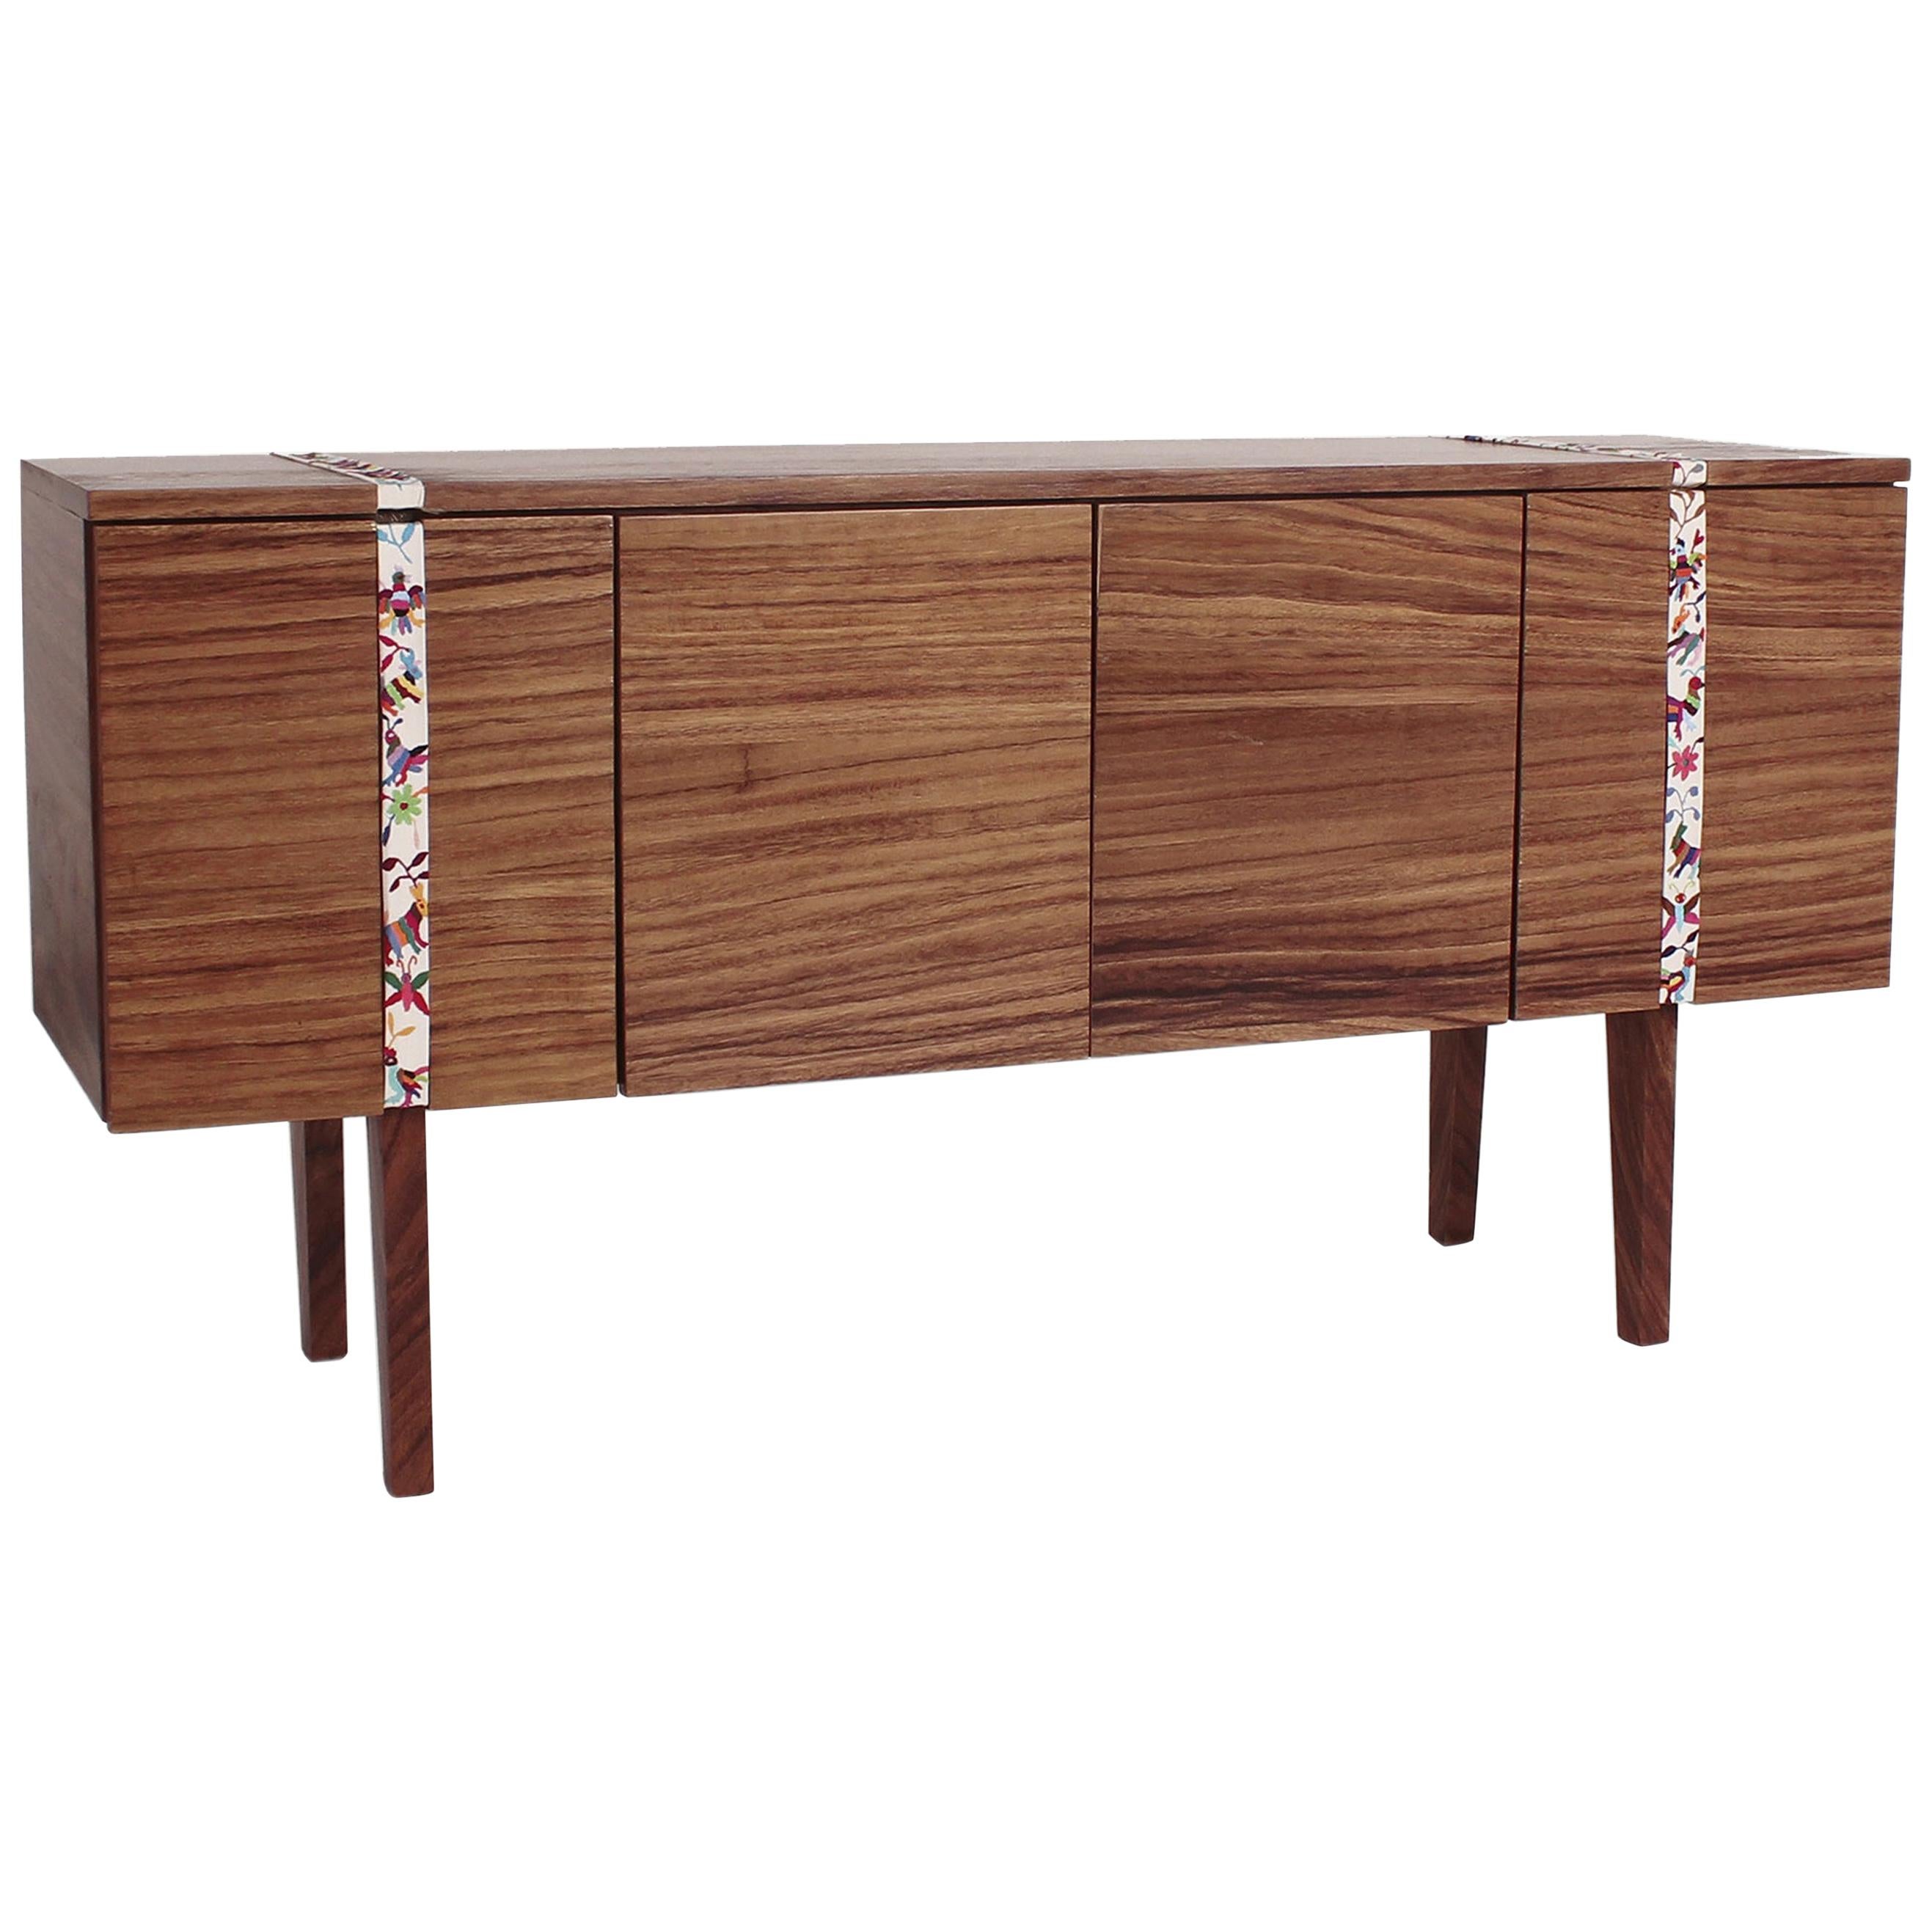 Sideboard in Parota Wood with Handmade Embroidery Detail